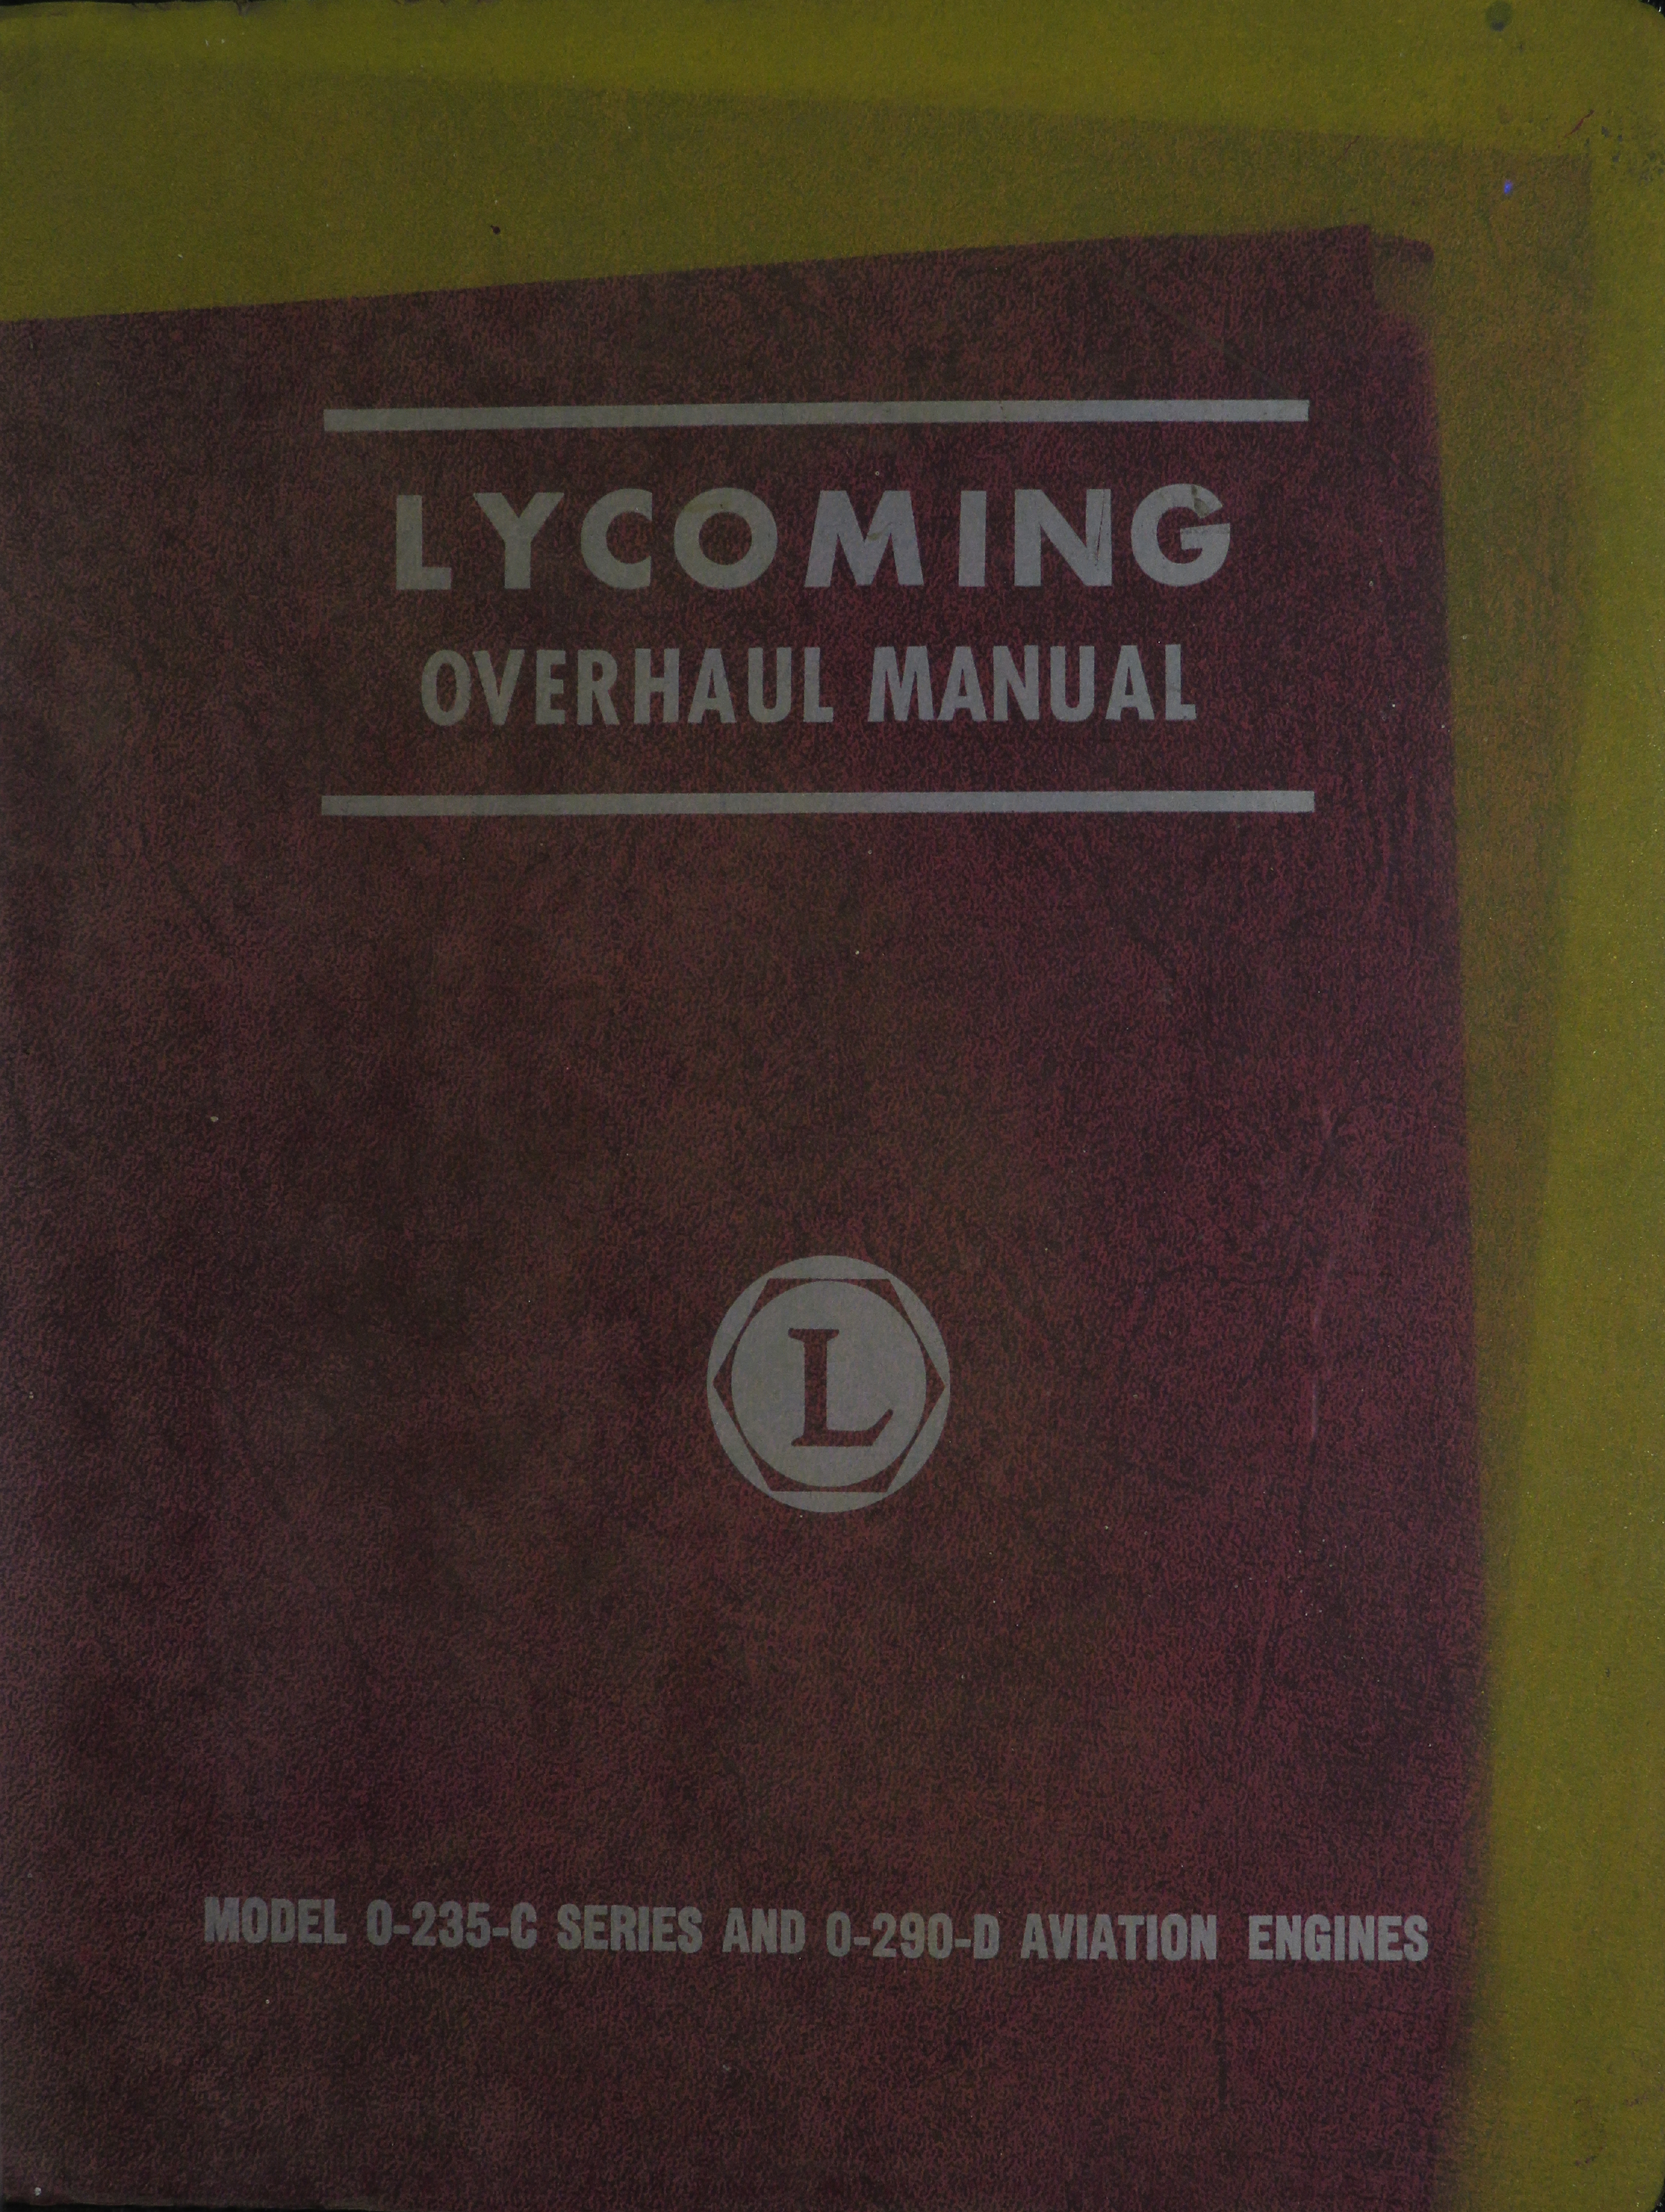 Sample page 1 from AirCorps Library document: Overhaul Manual for Lycoming Model 0-235-C Series and 0-290-D Engines